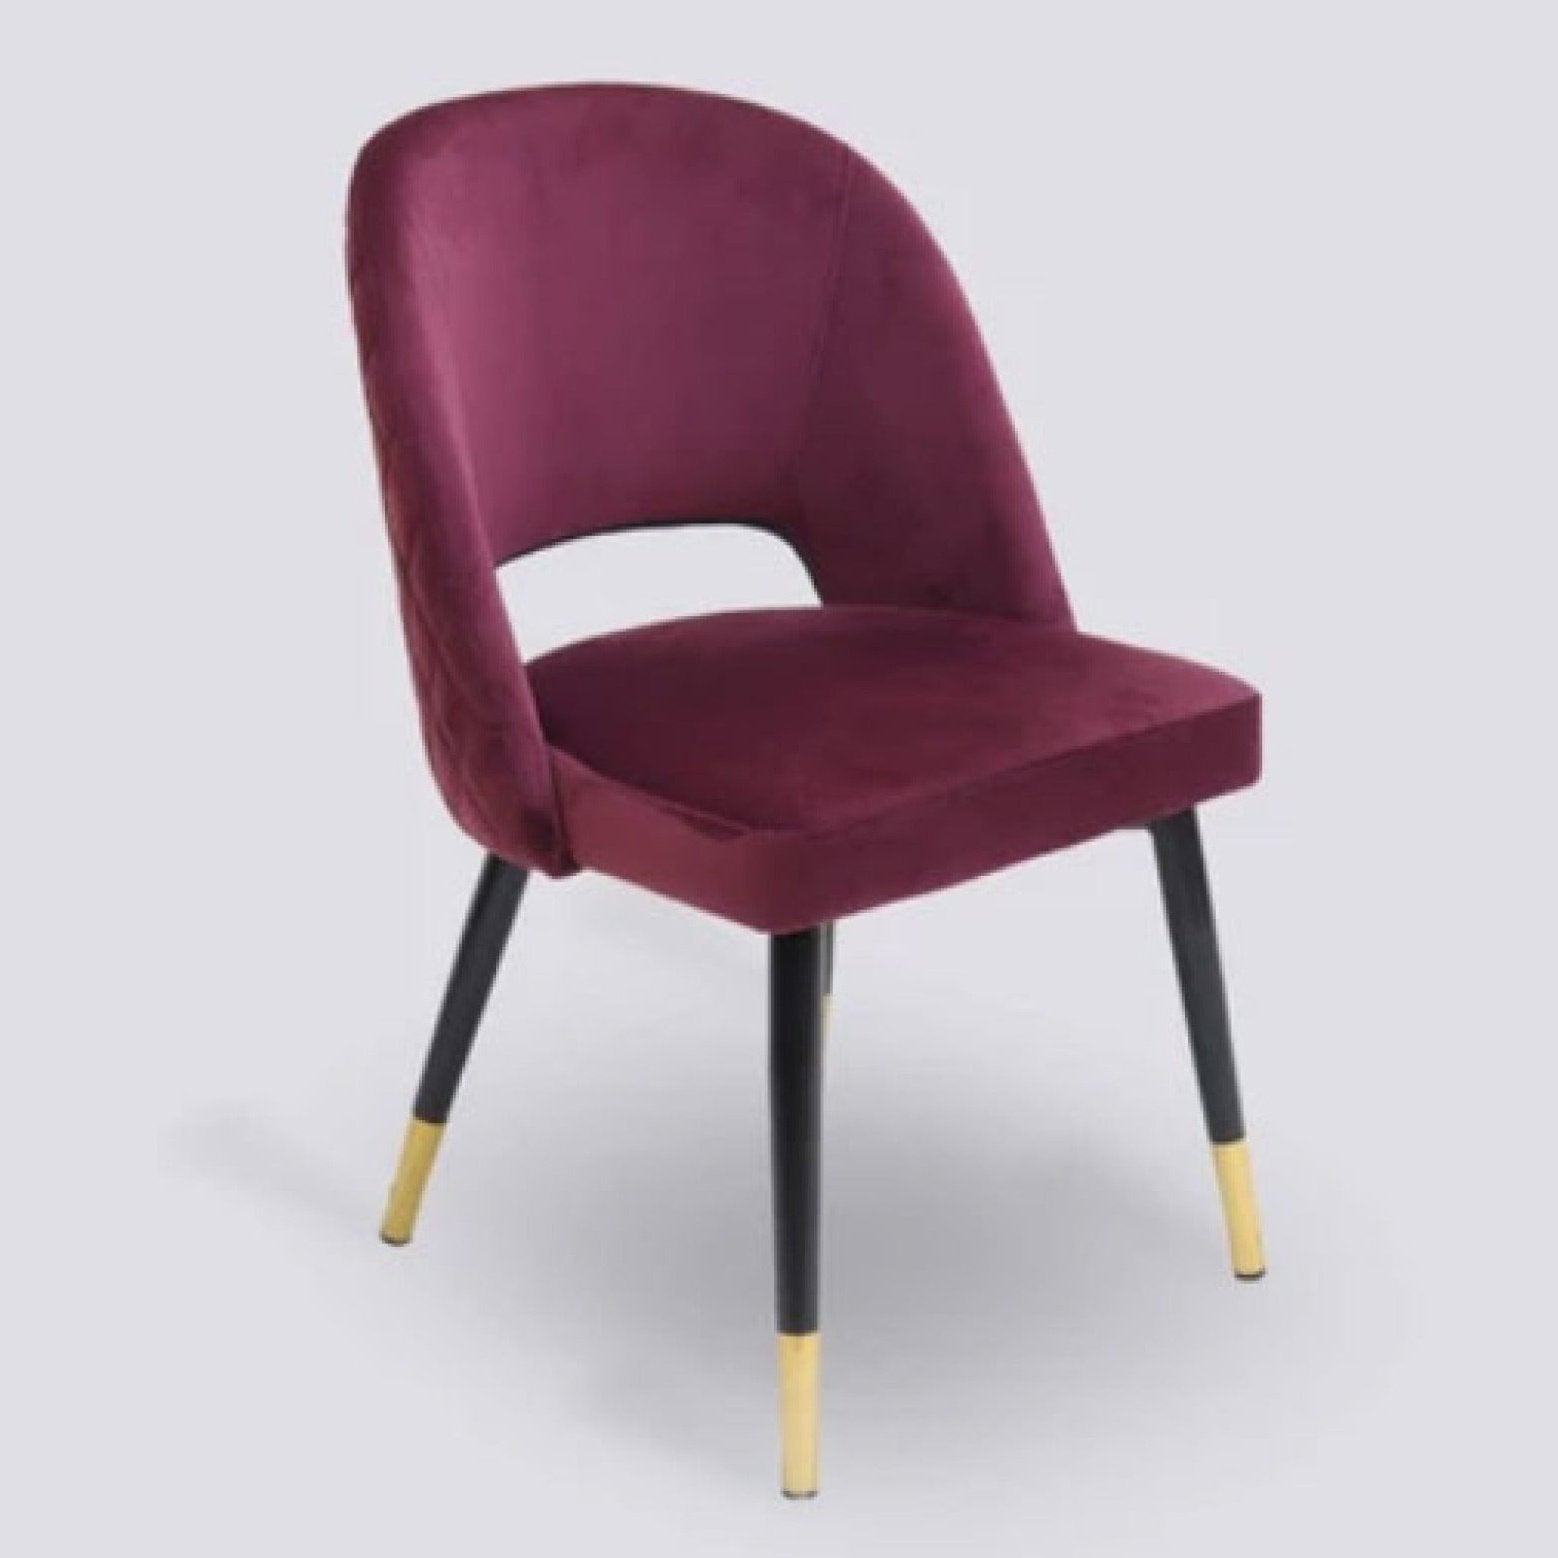 LUX-499 DINING CHAIR Mobel Furniture